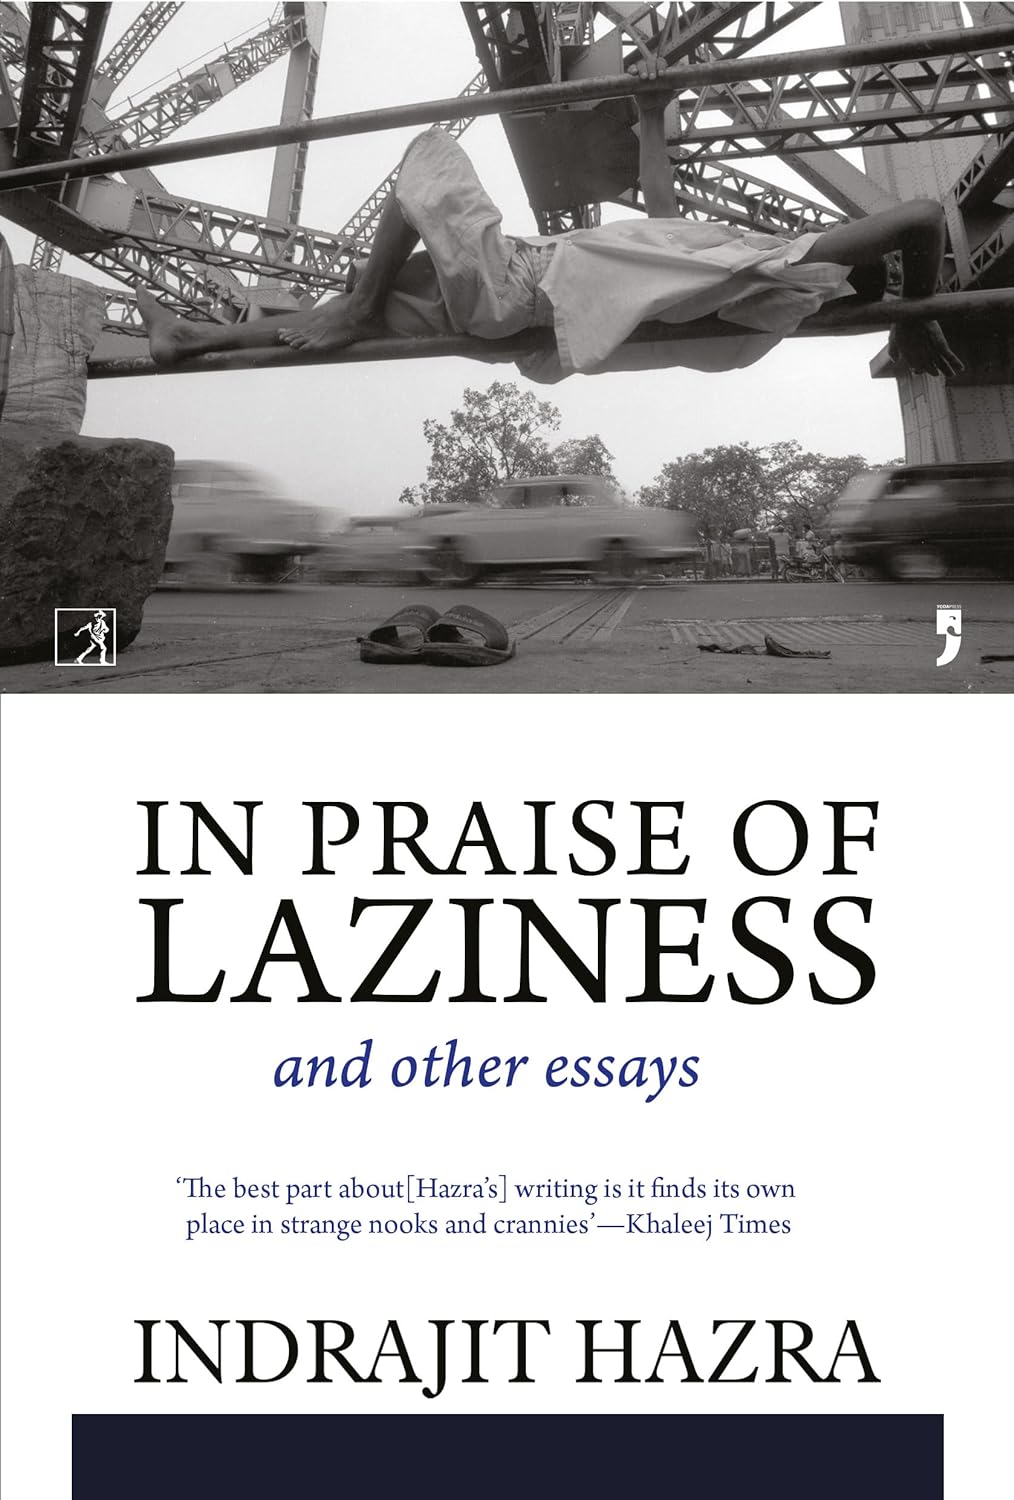 In Praise of Laziness and other essays